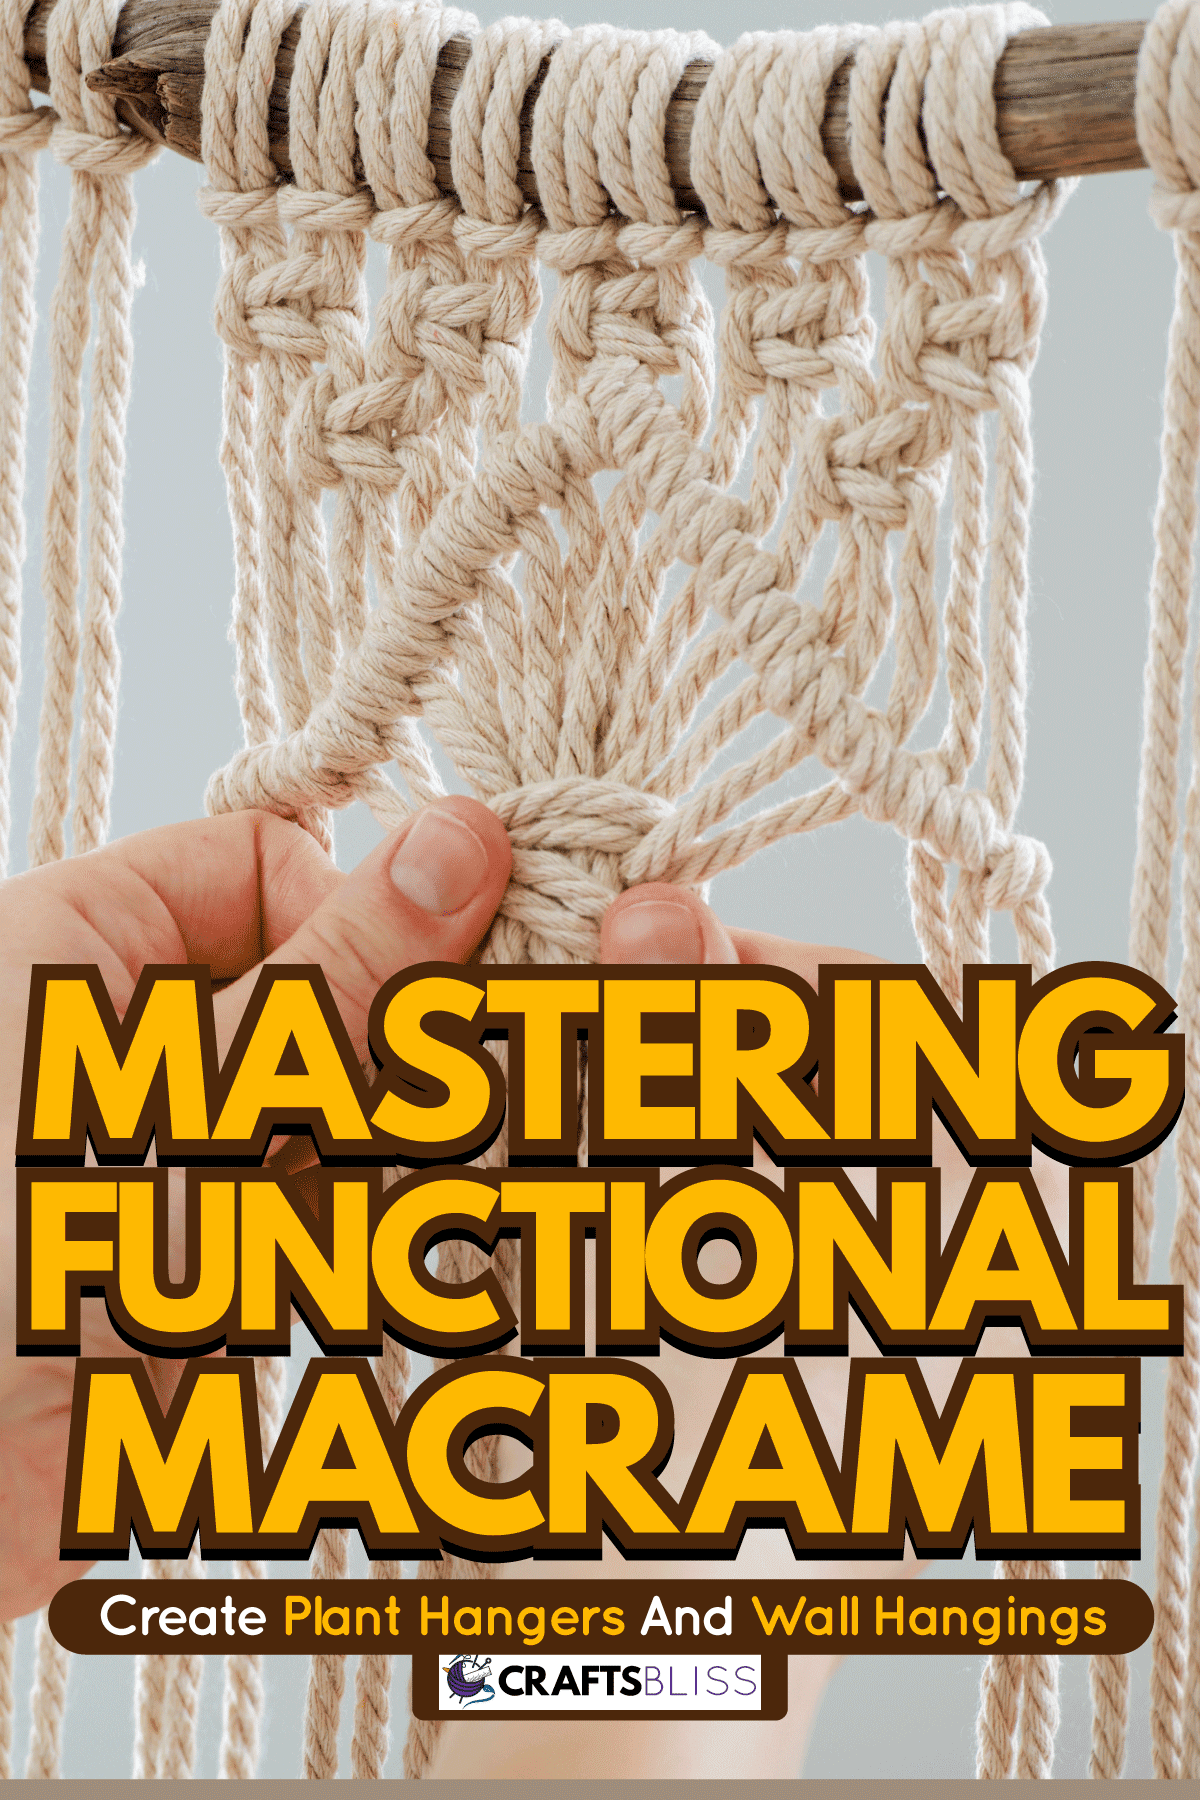 Brunette woman working on a half-finished macrame piece, weaving ropes, making knots, Mastering Functional Macrame: Create Plant Hangers And Wall Hangings